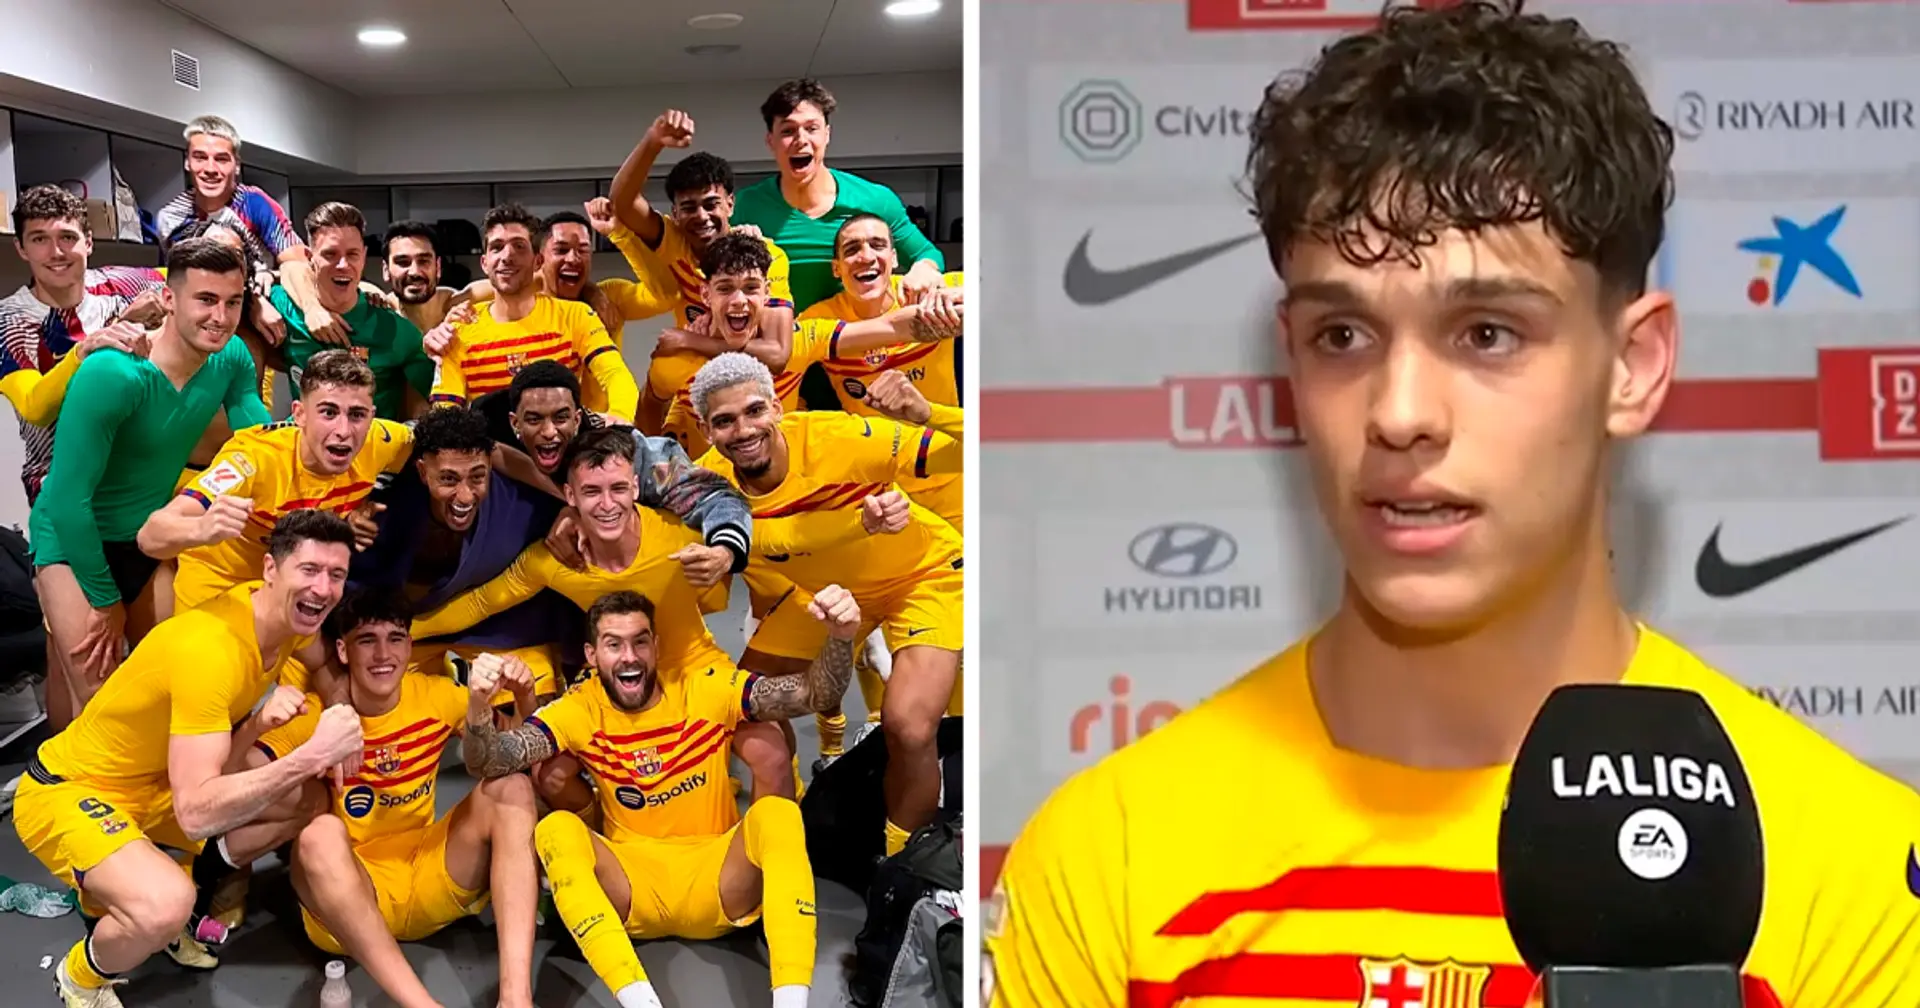 Hector Fort reveals Barca's goal for this season - fans will like what he said